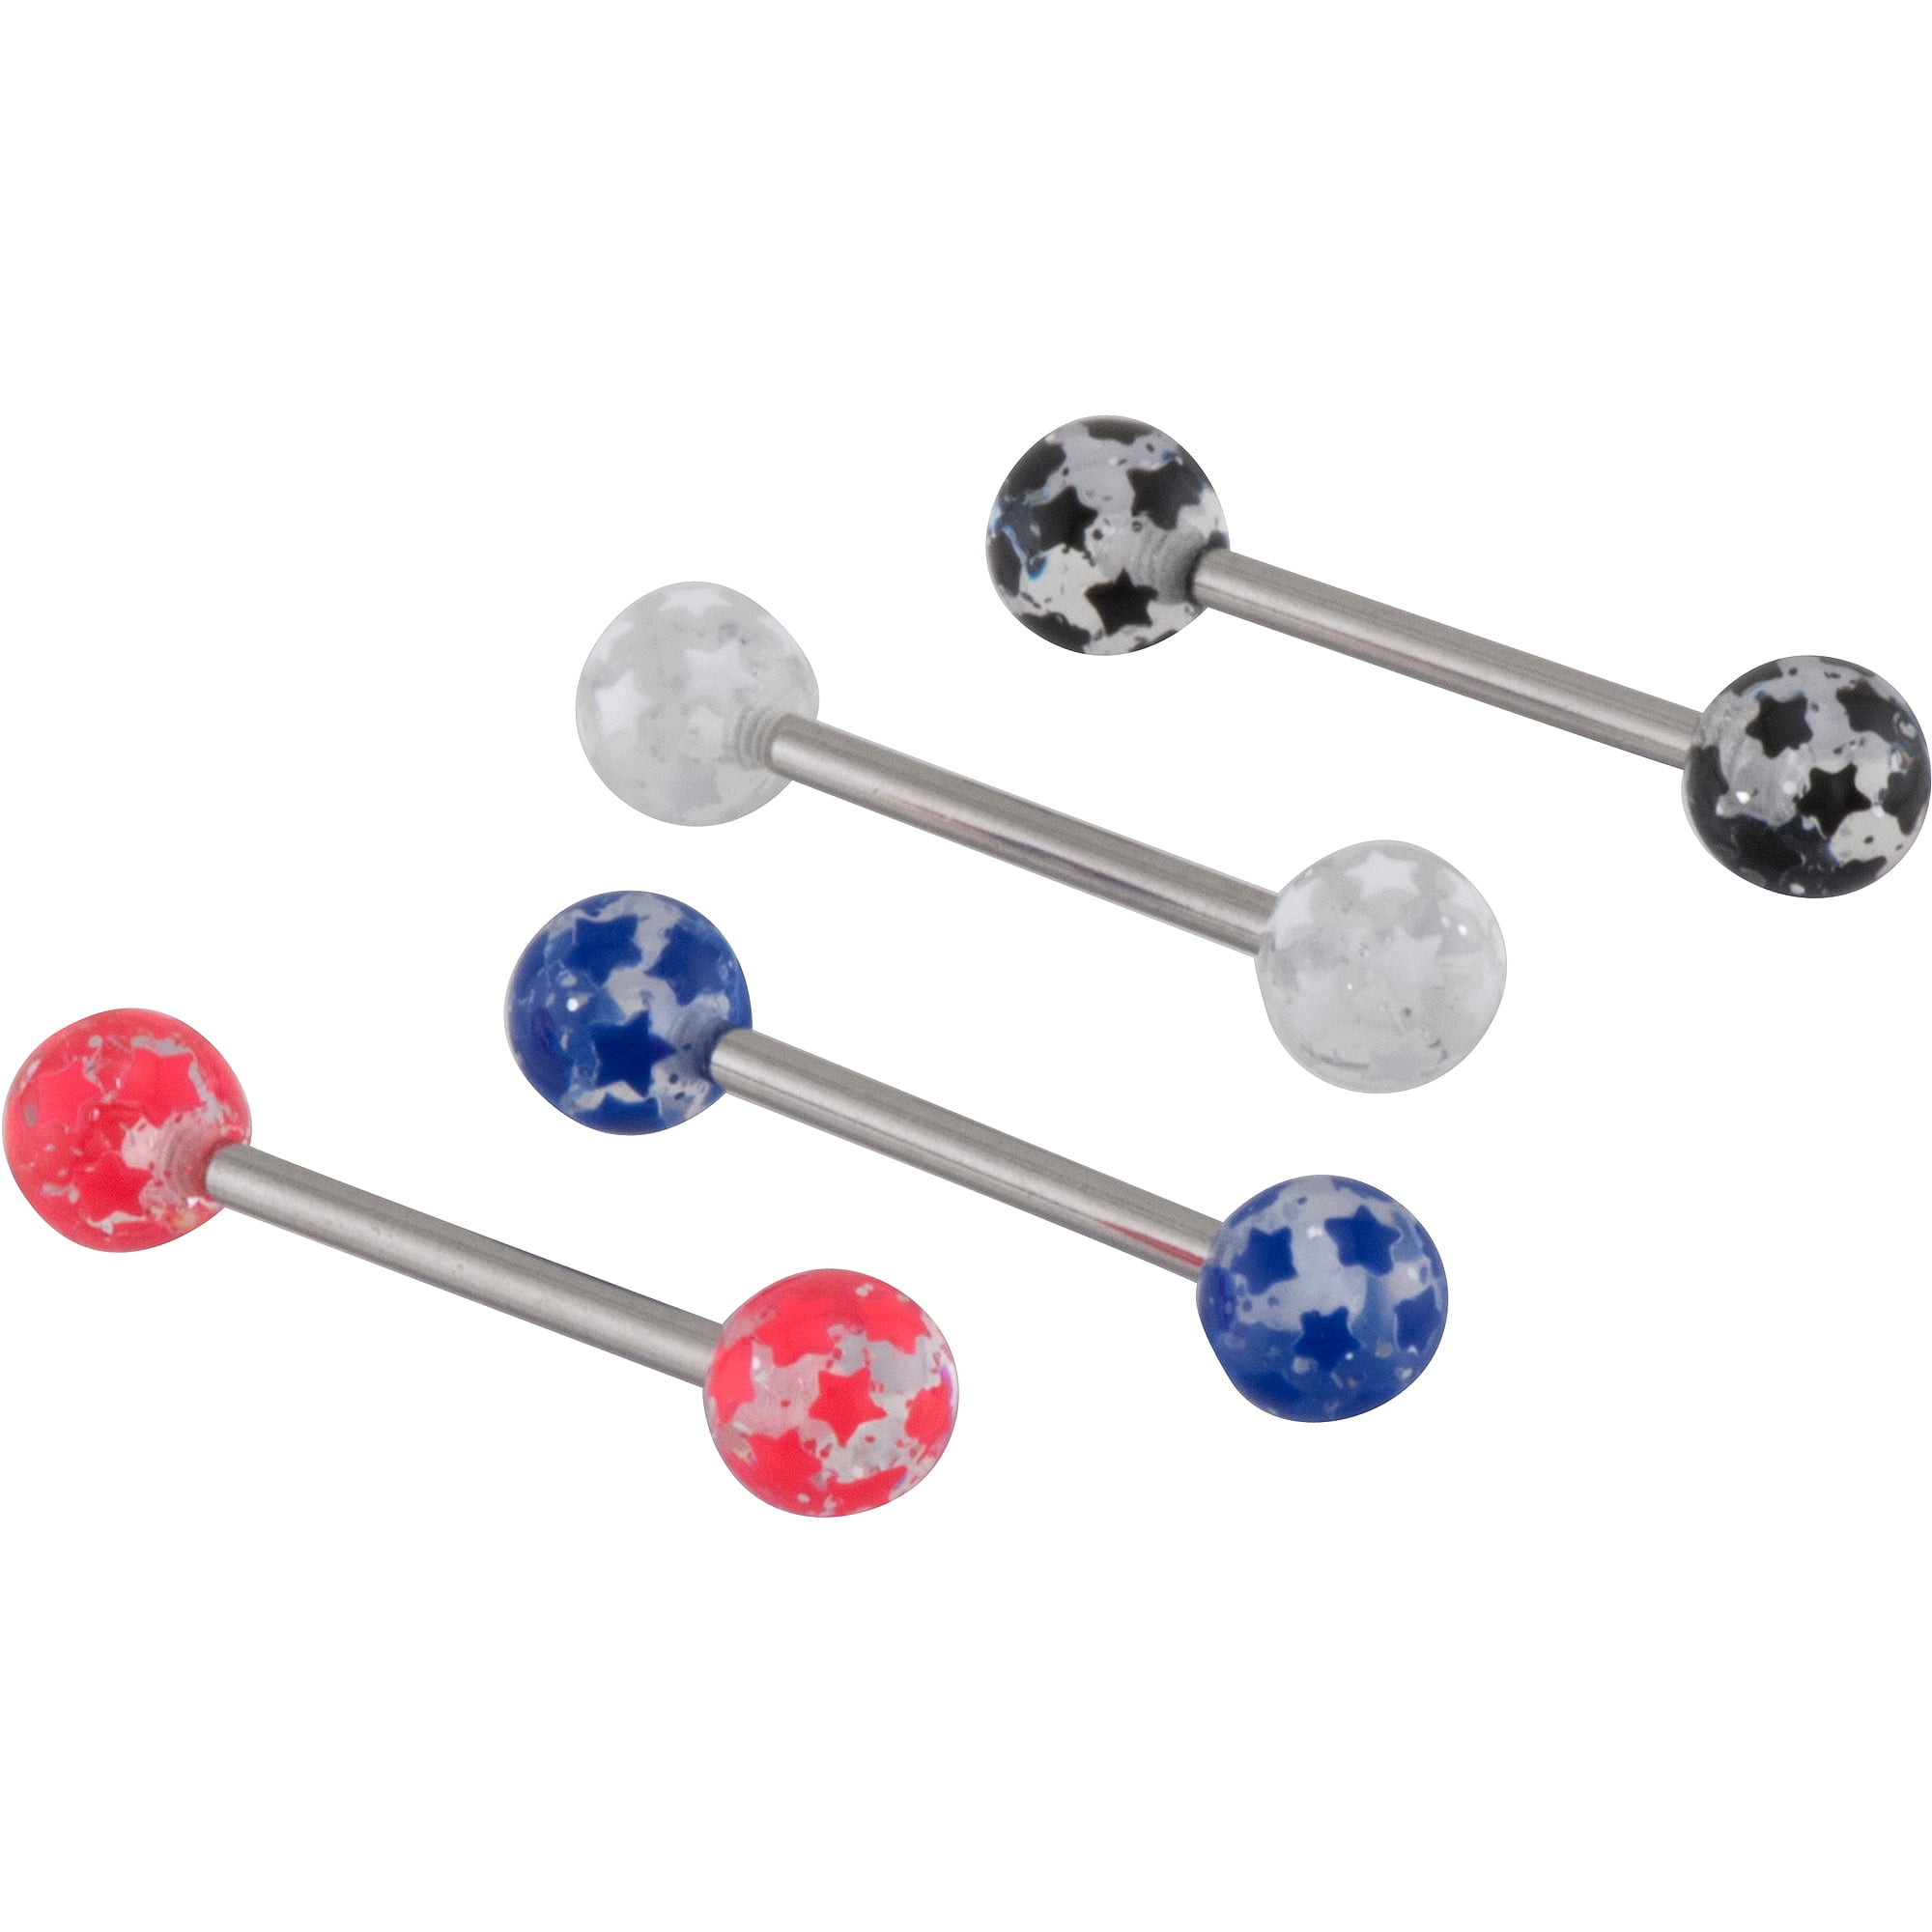 7 PCS Colorful Steel Bar Tongue Rings Body Piercing Jewelry Tounge Bars 